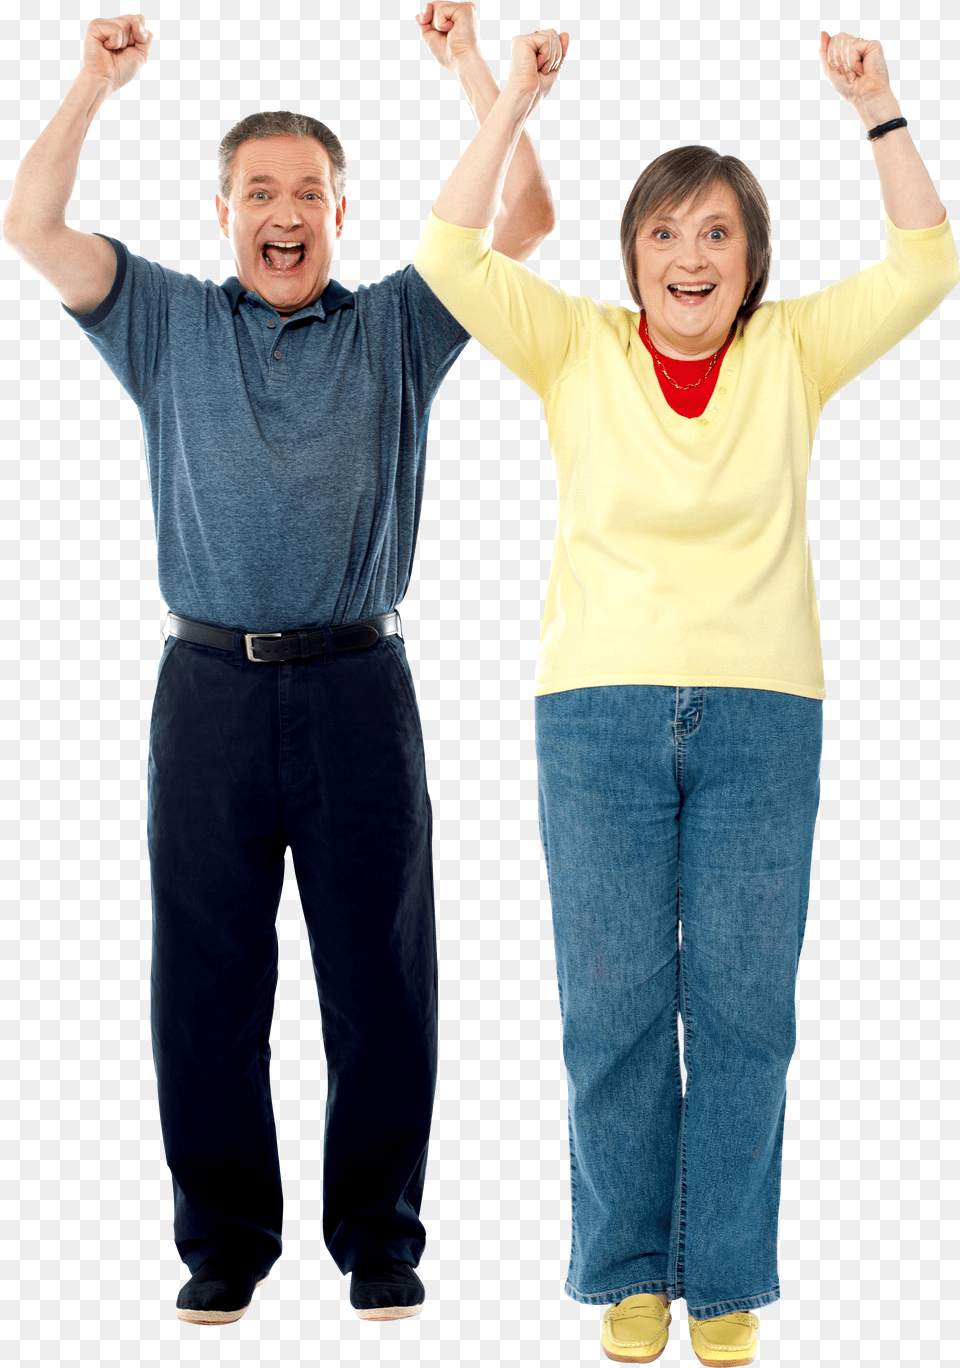 Images Transparent Background Excited Couple Png Image